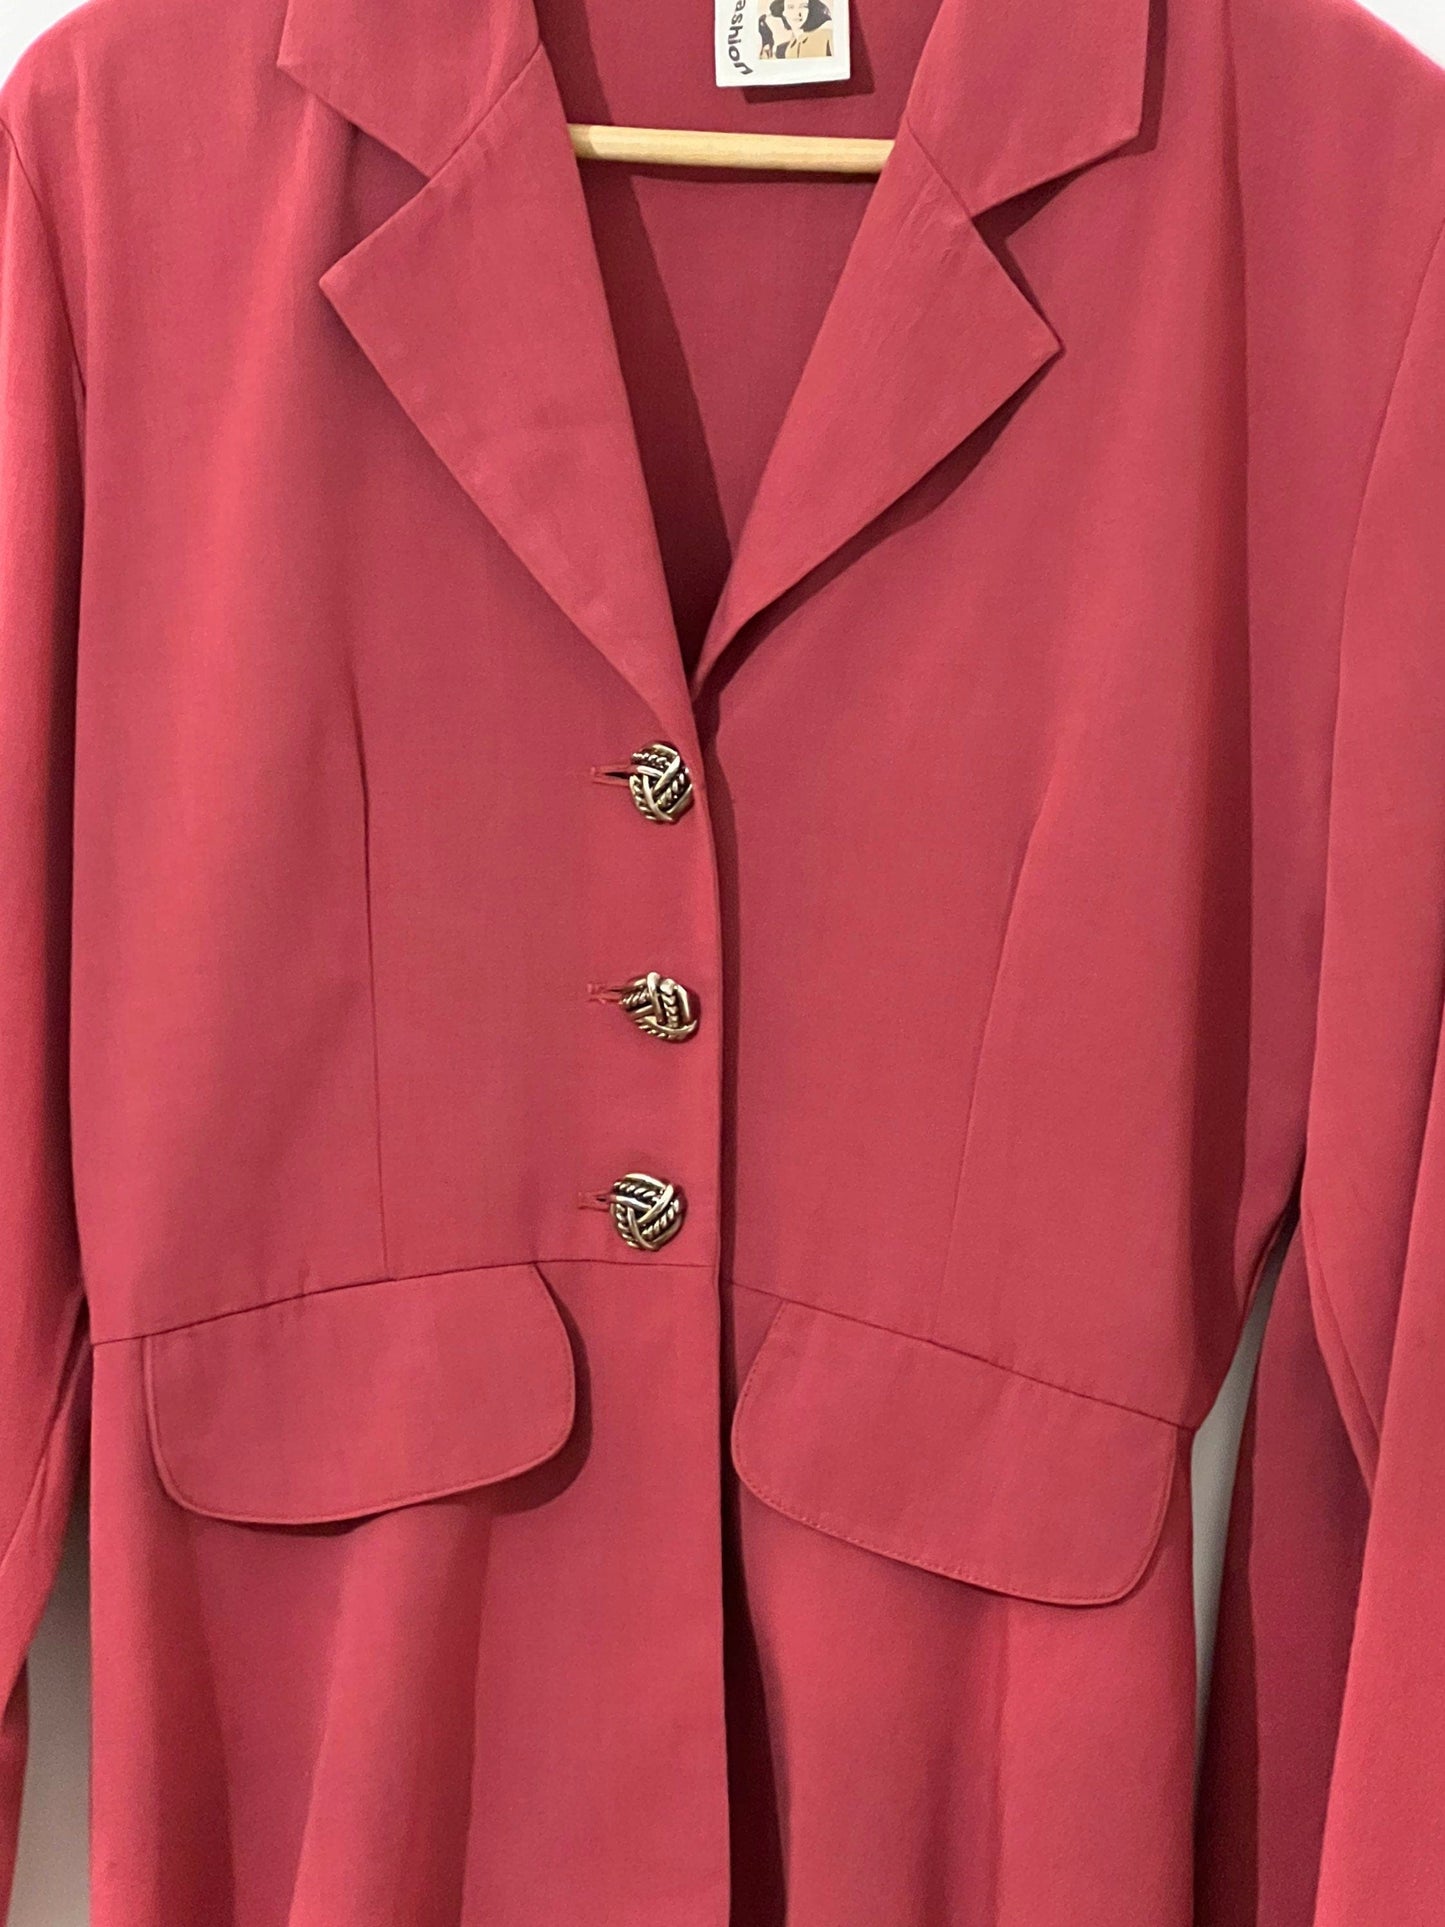 Deep Coral cotton Mix 80s Skirt Suit - Skirt and blazer Size 8-10